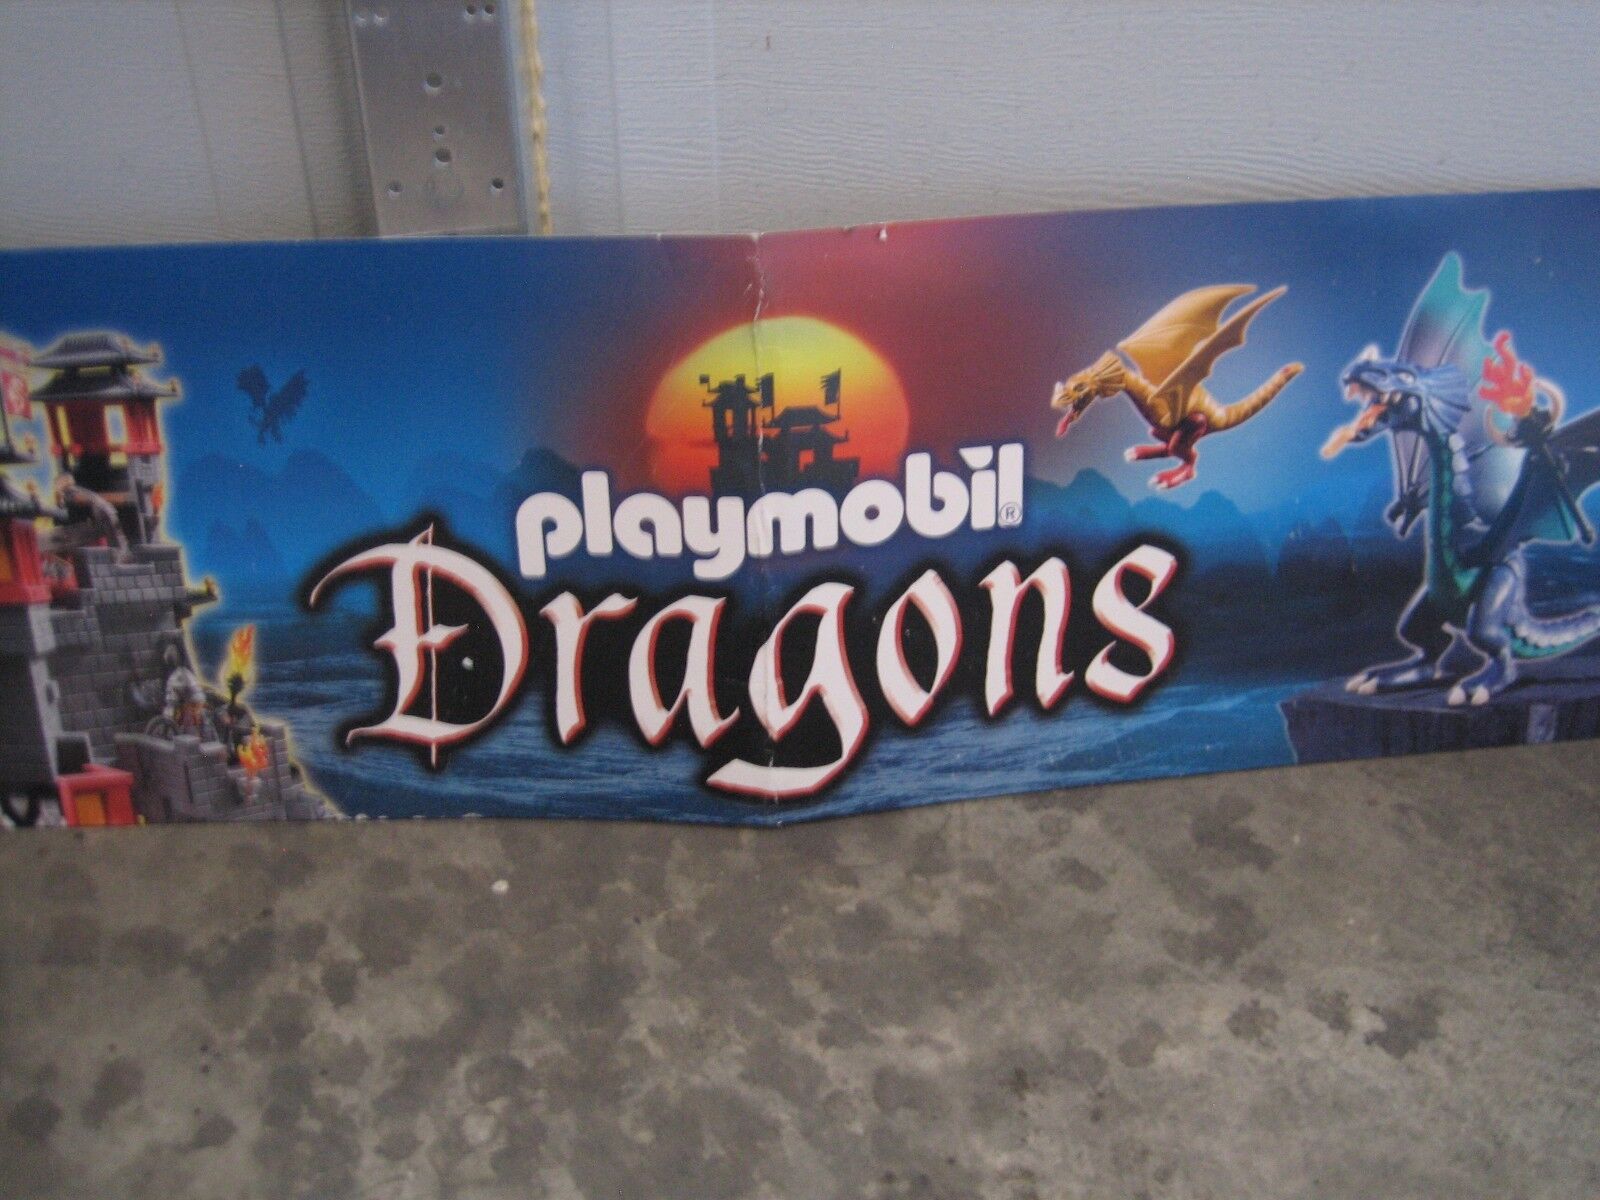 TOYS R US PLAYMOBIL DRAGONS STORE DISPLAY BANNER SIGN 68X10 RARE GEOFFREY LEGO